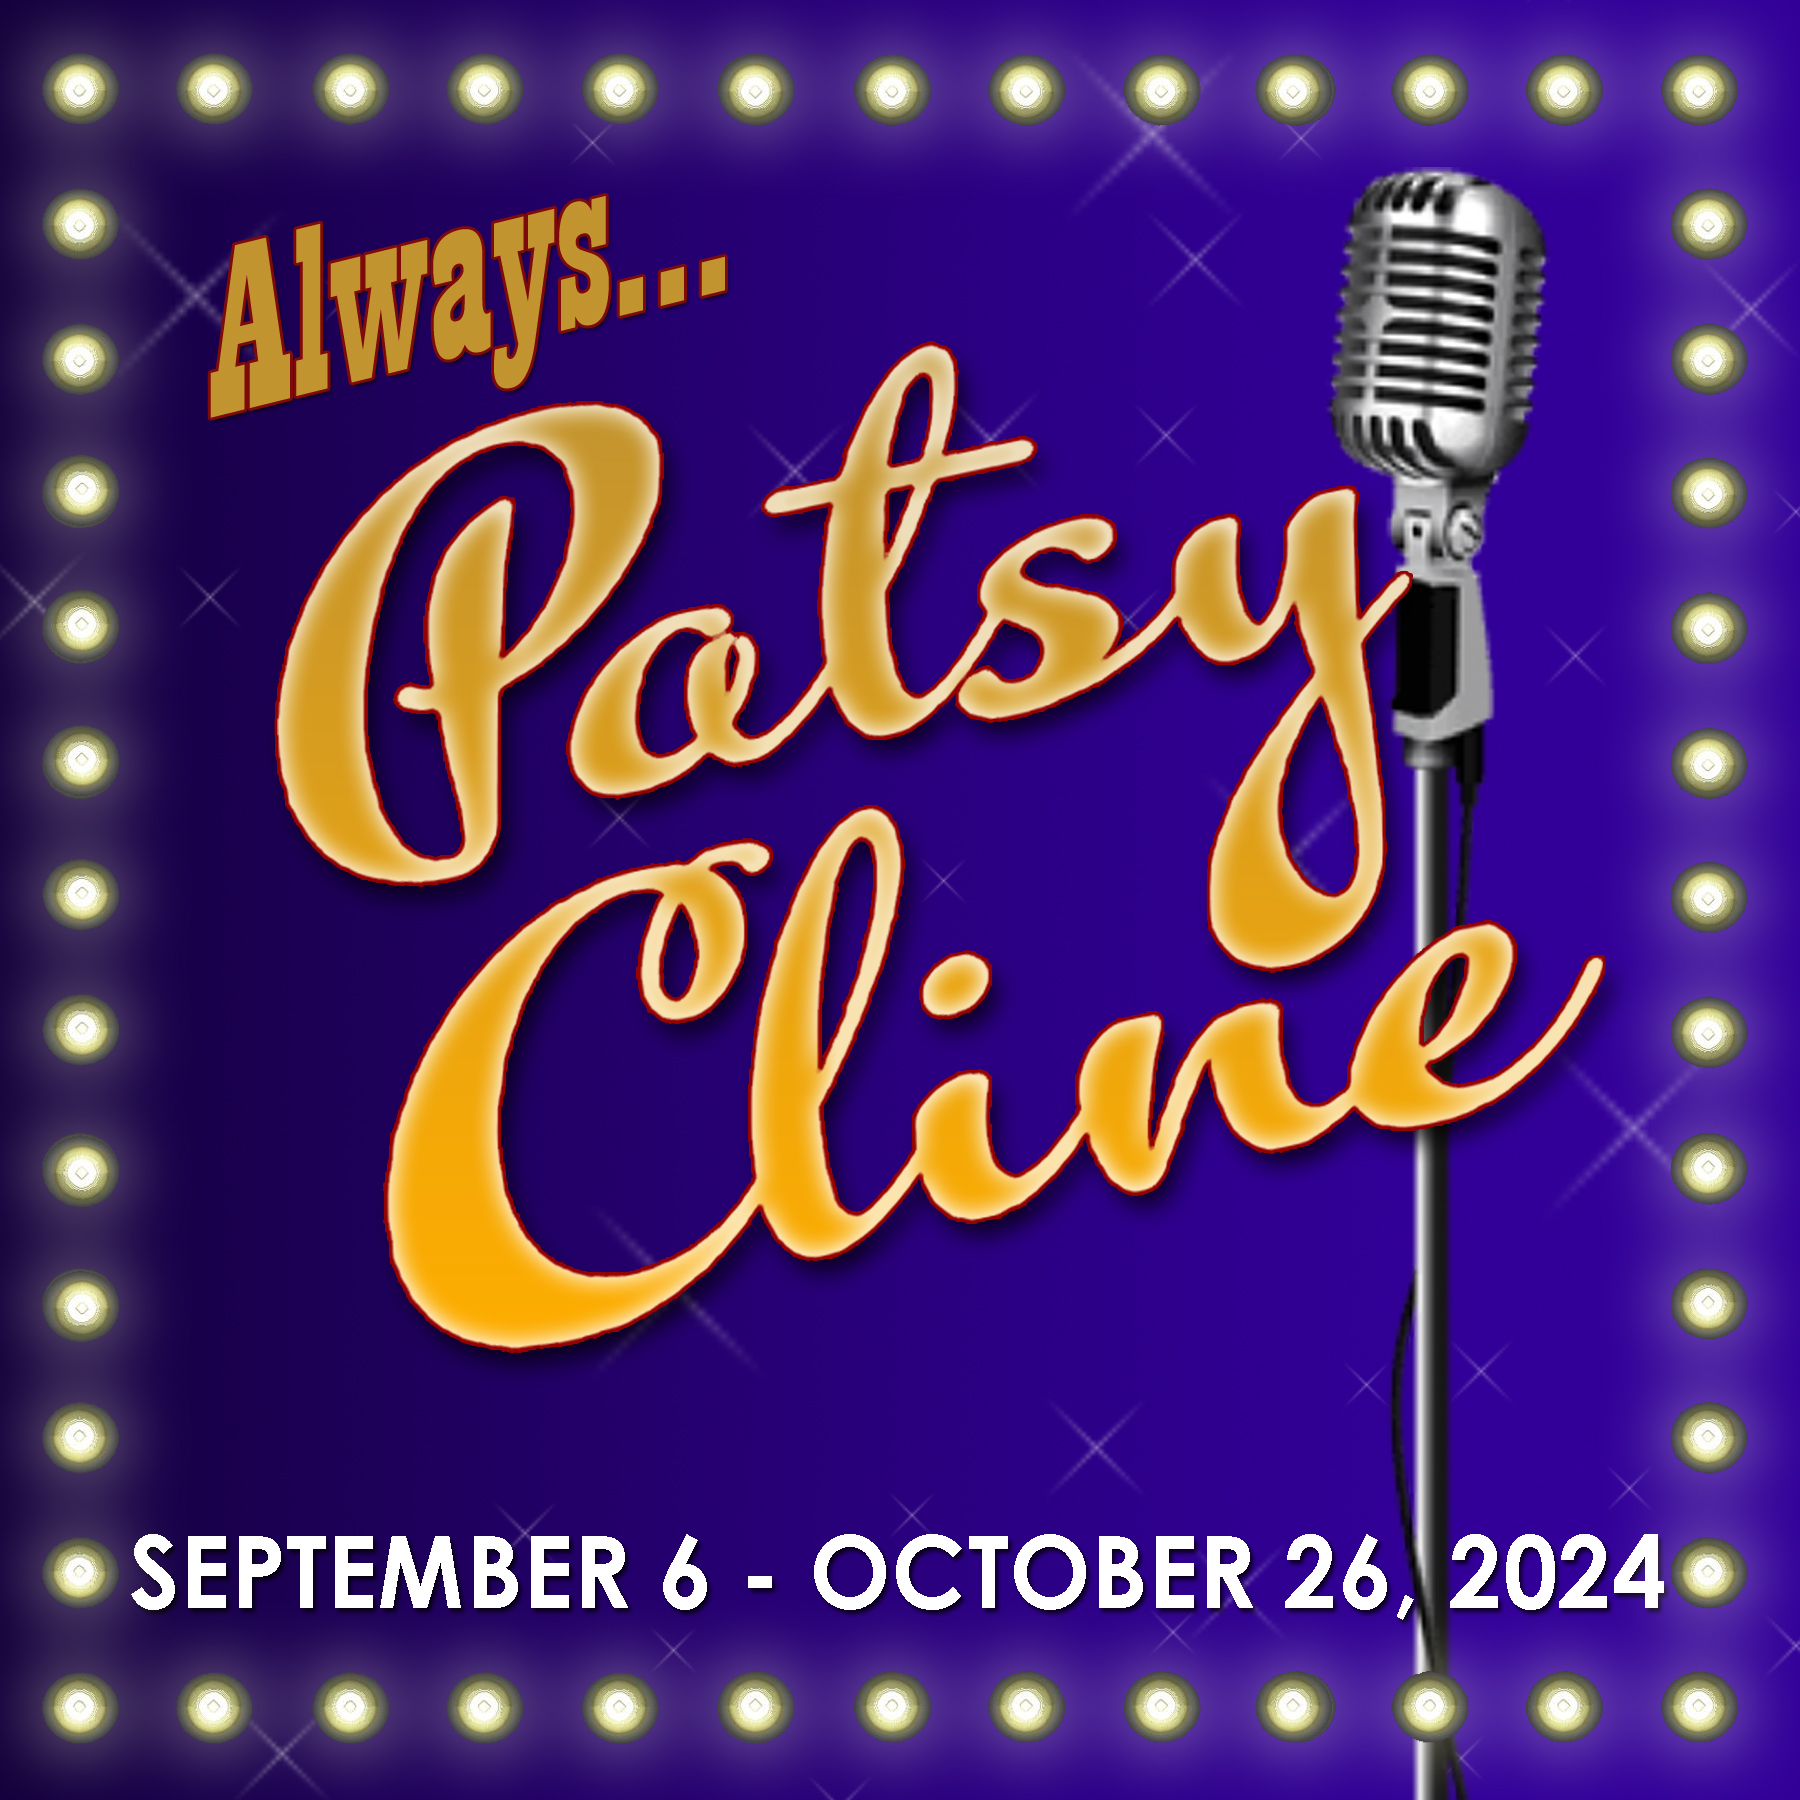 Always, Patsy Cline at the Pines Dinner Theatre